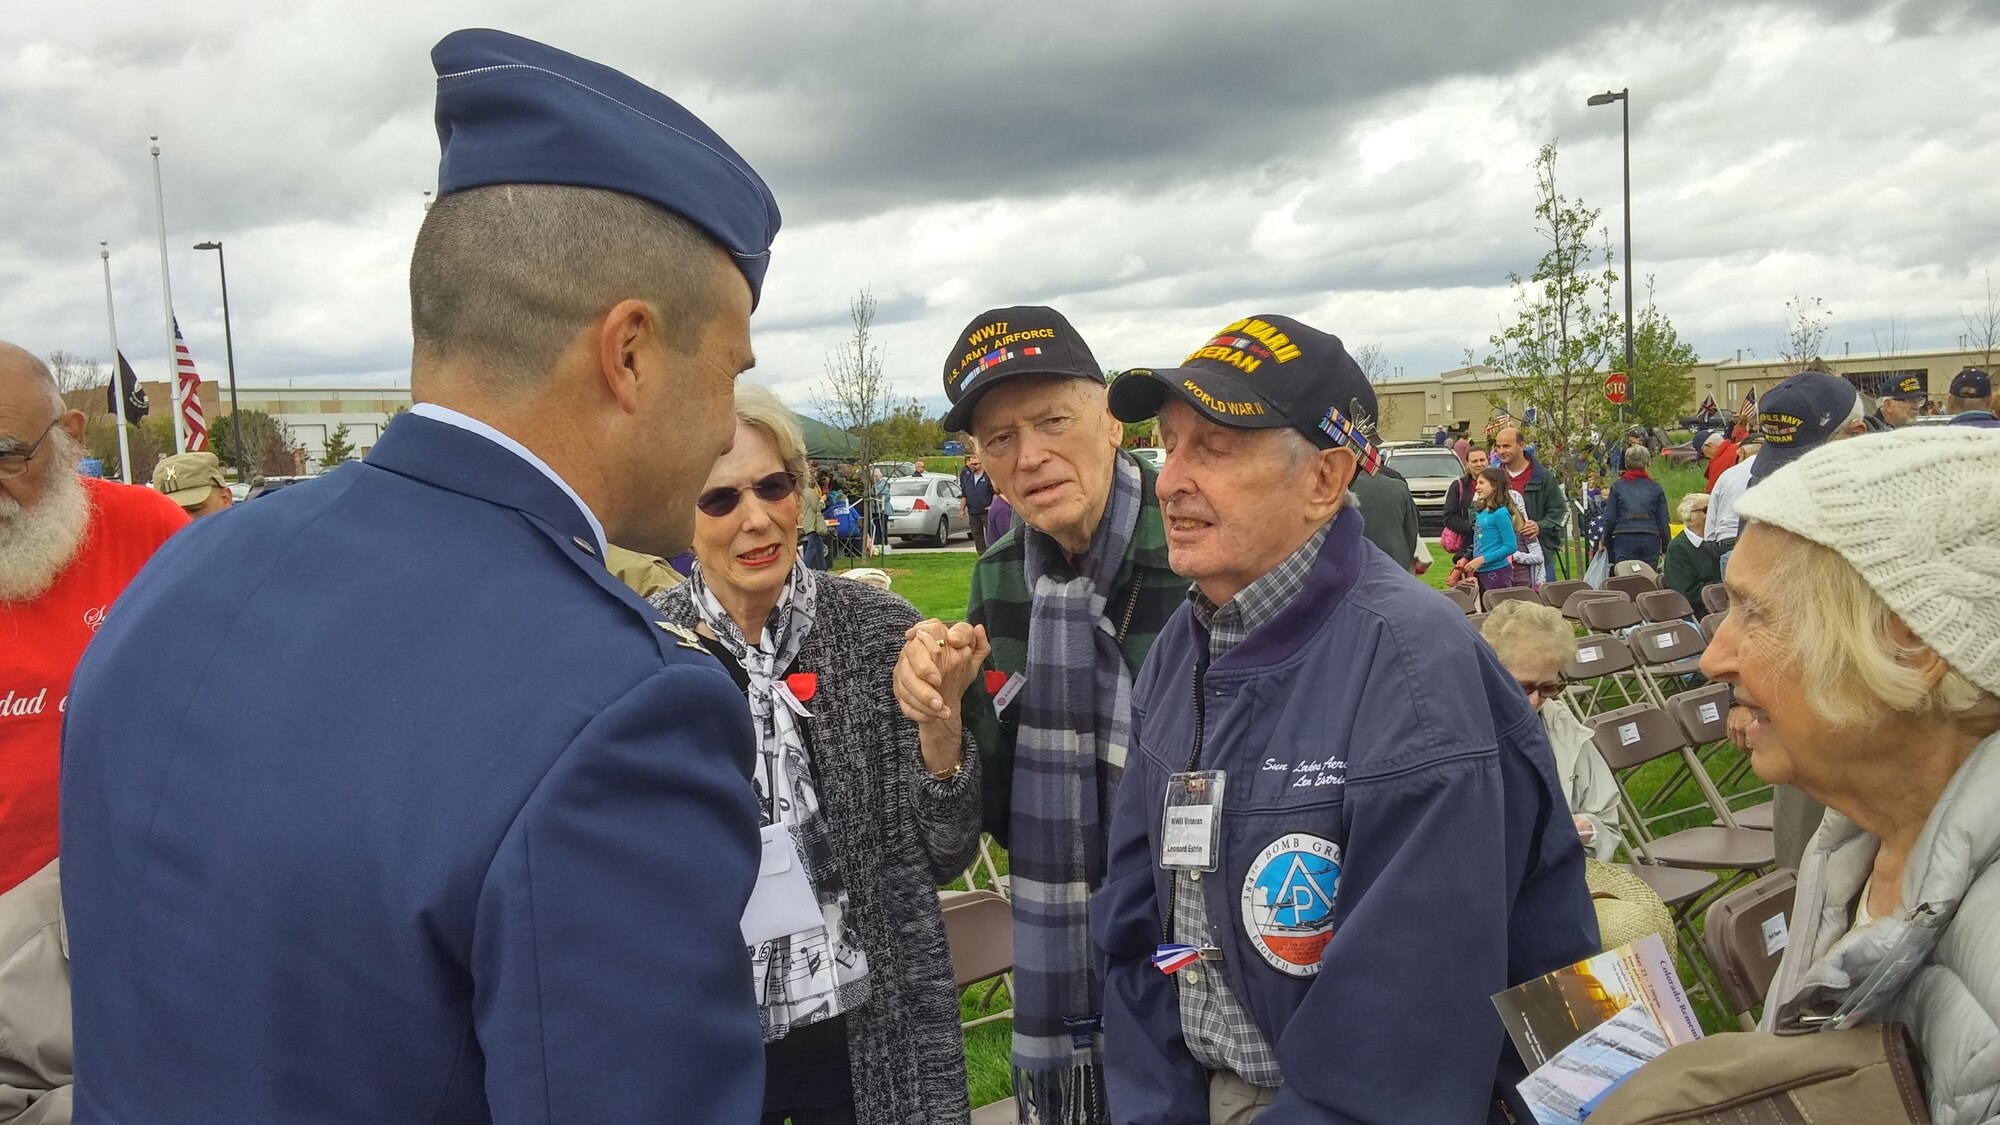 Col. John Wagner, 460th Space Wing commander, speaks with World War II veterans during the Memorial Day ceremony May 23, 2015, at the Colorado Freedom Memorial in Aurora, Colorado. This year’s ceremony had multiple guest speakers, flyovers, military displays and also marked the 70th anniversary of the end of World War II. (courtesy photo)